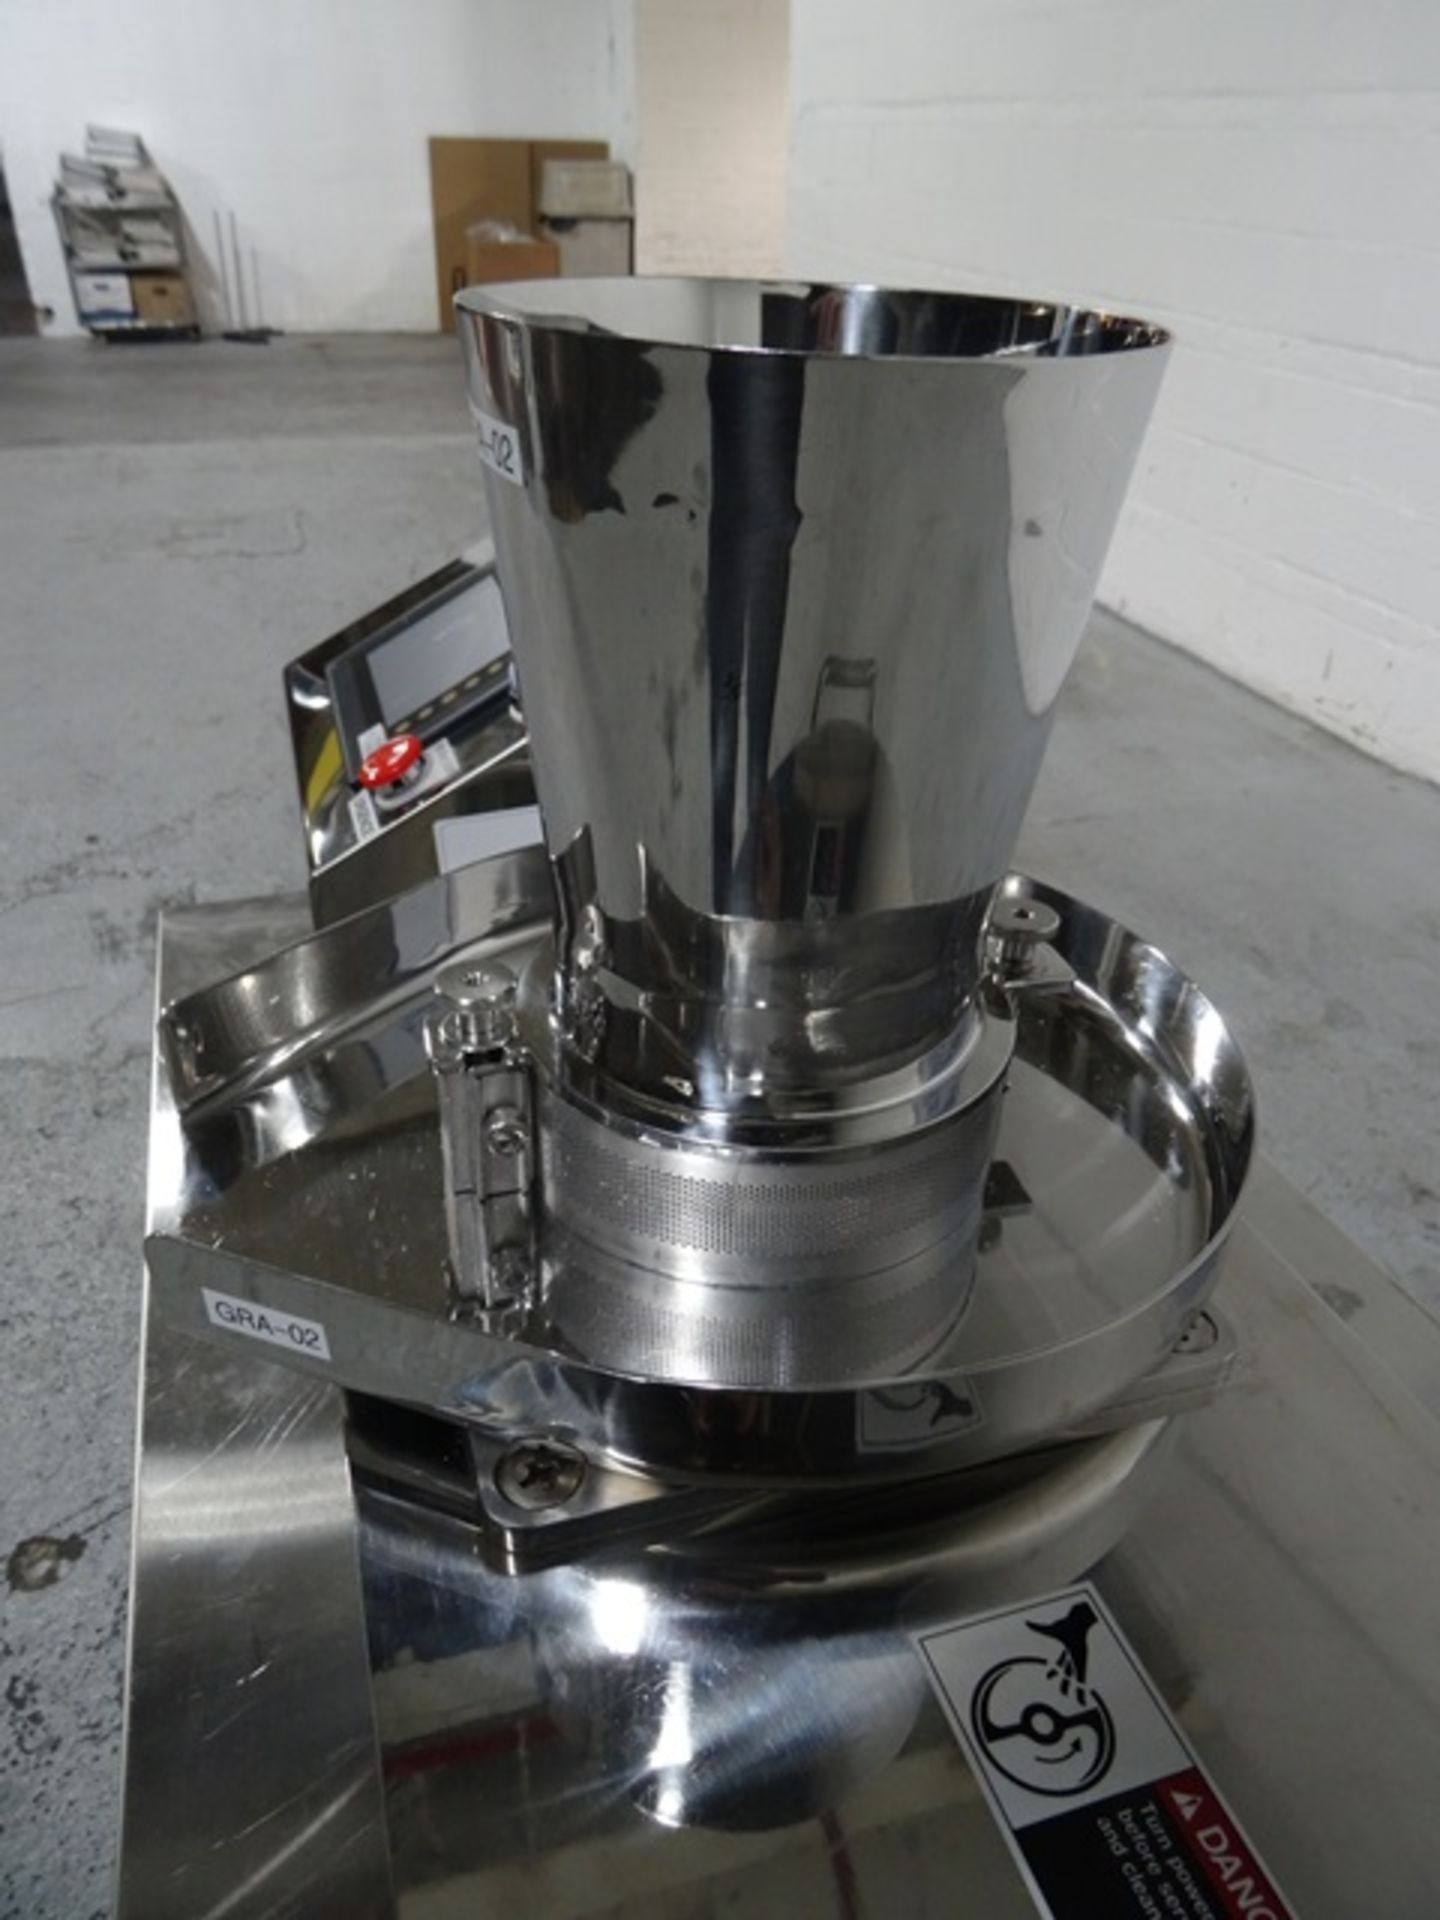 Fuji Paudal LCI Basket Granulator, model BR-150, stainless steel construction, with feed hopper, - Image 5 of 21